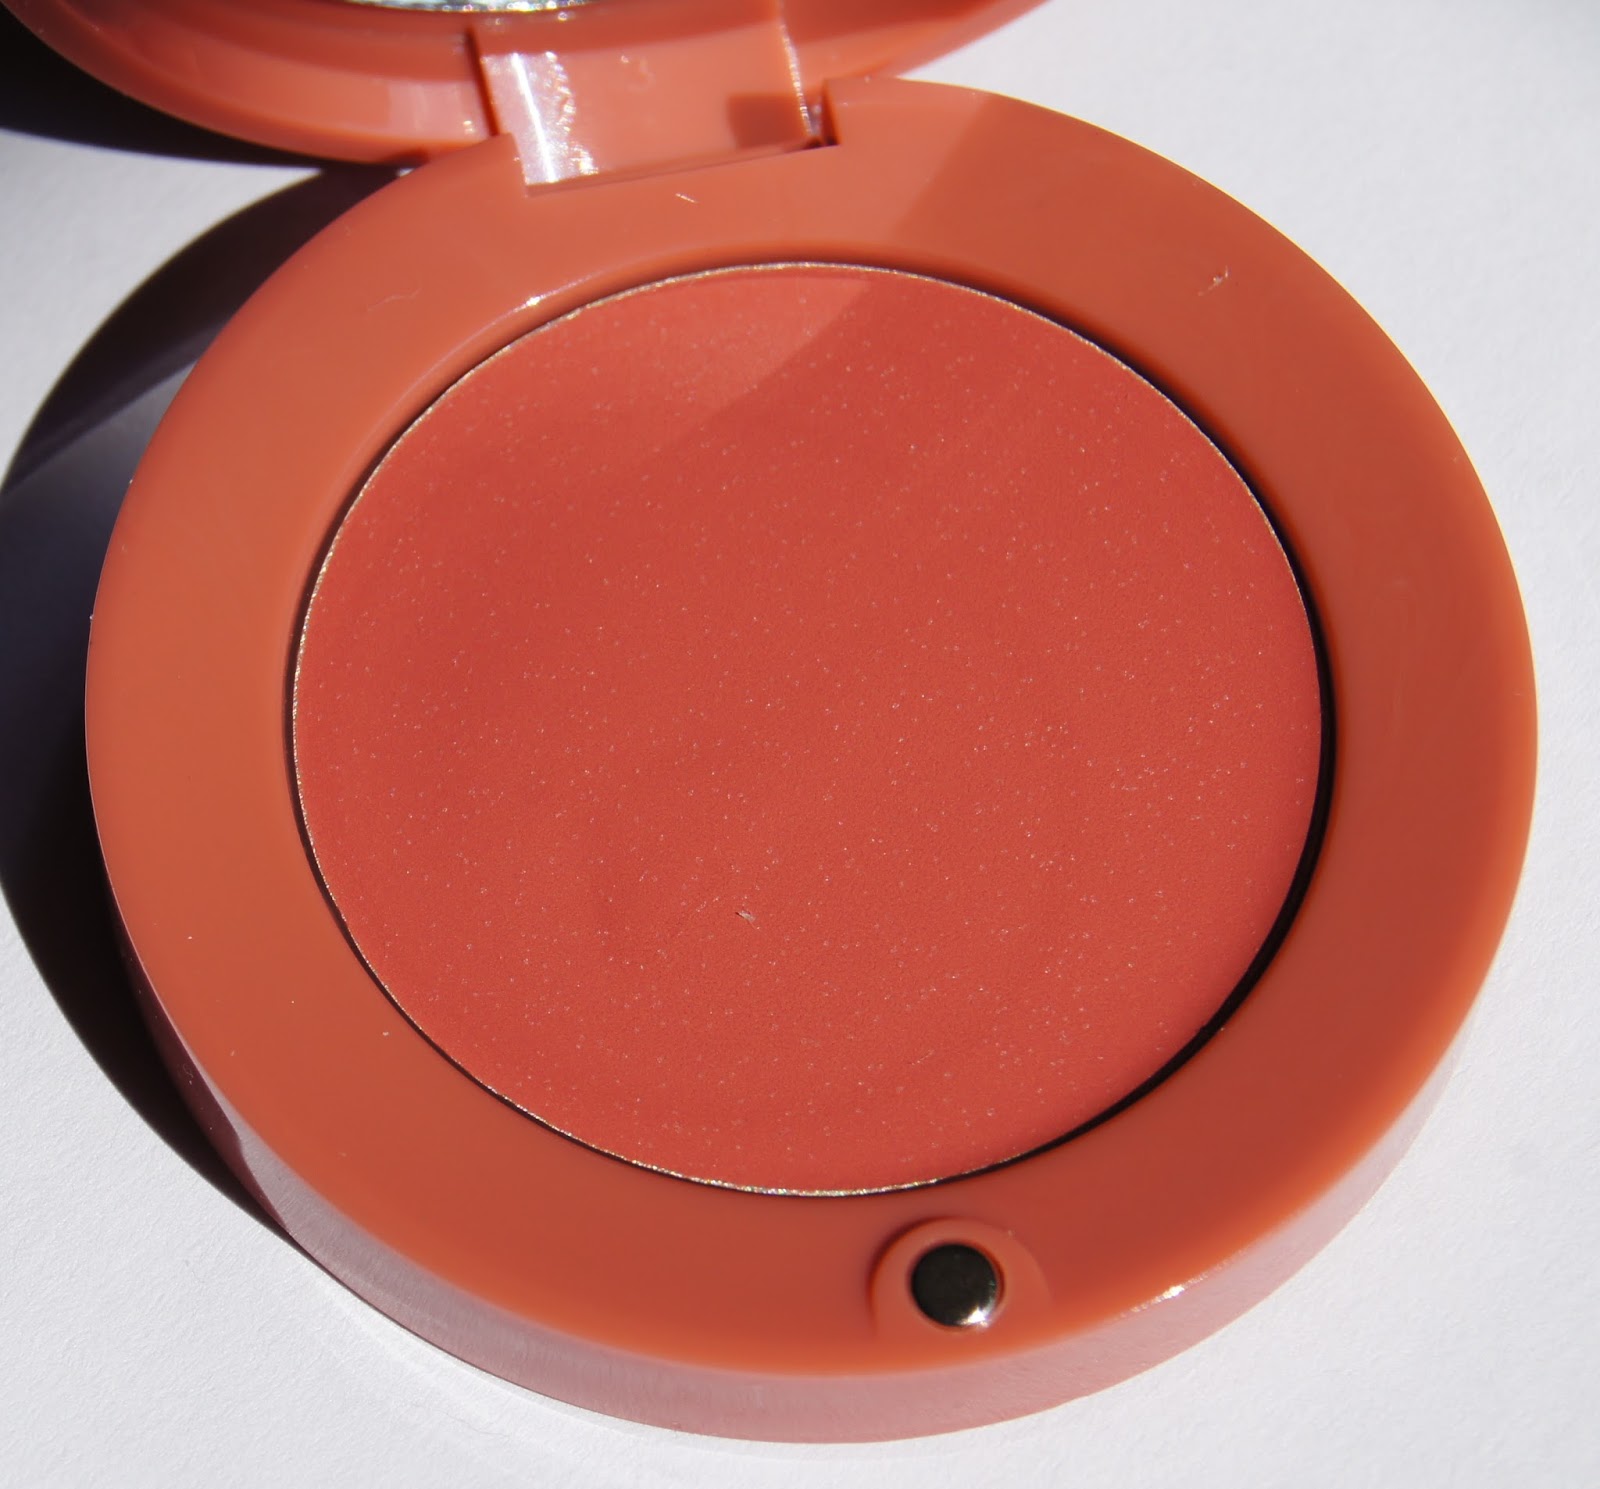 bourgeois little round pot cream blushes 04 sweet cherry review